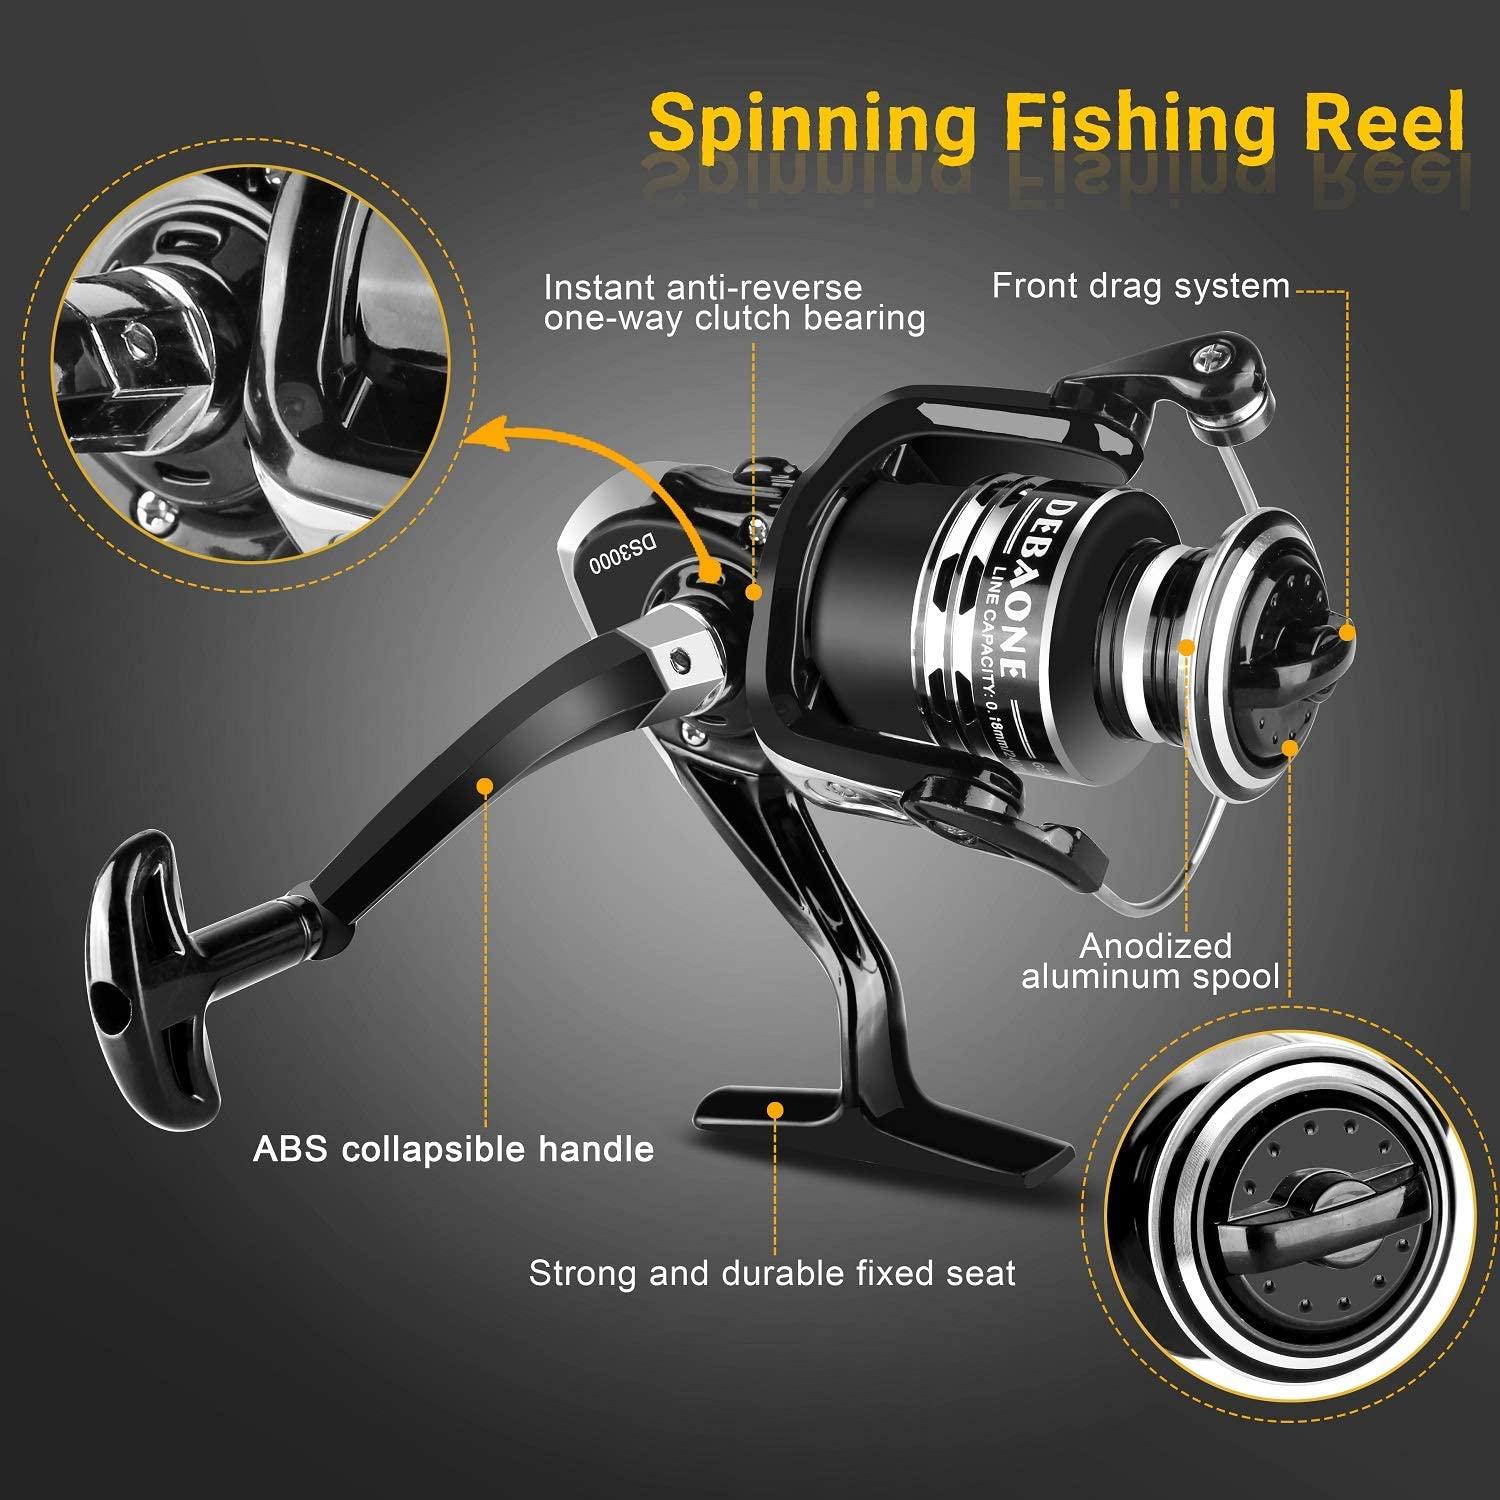 Fishing Rod Kit, Carbon Fiber Telescopic Fishing Rod and Reel Combo with  Spinning Reel, Line, Bionic Bait, Hooks and Carrier Bag, Fishing Gear Set  for